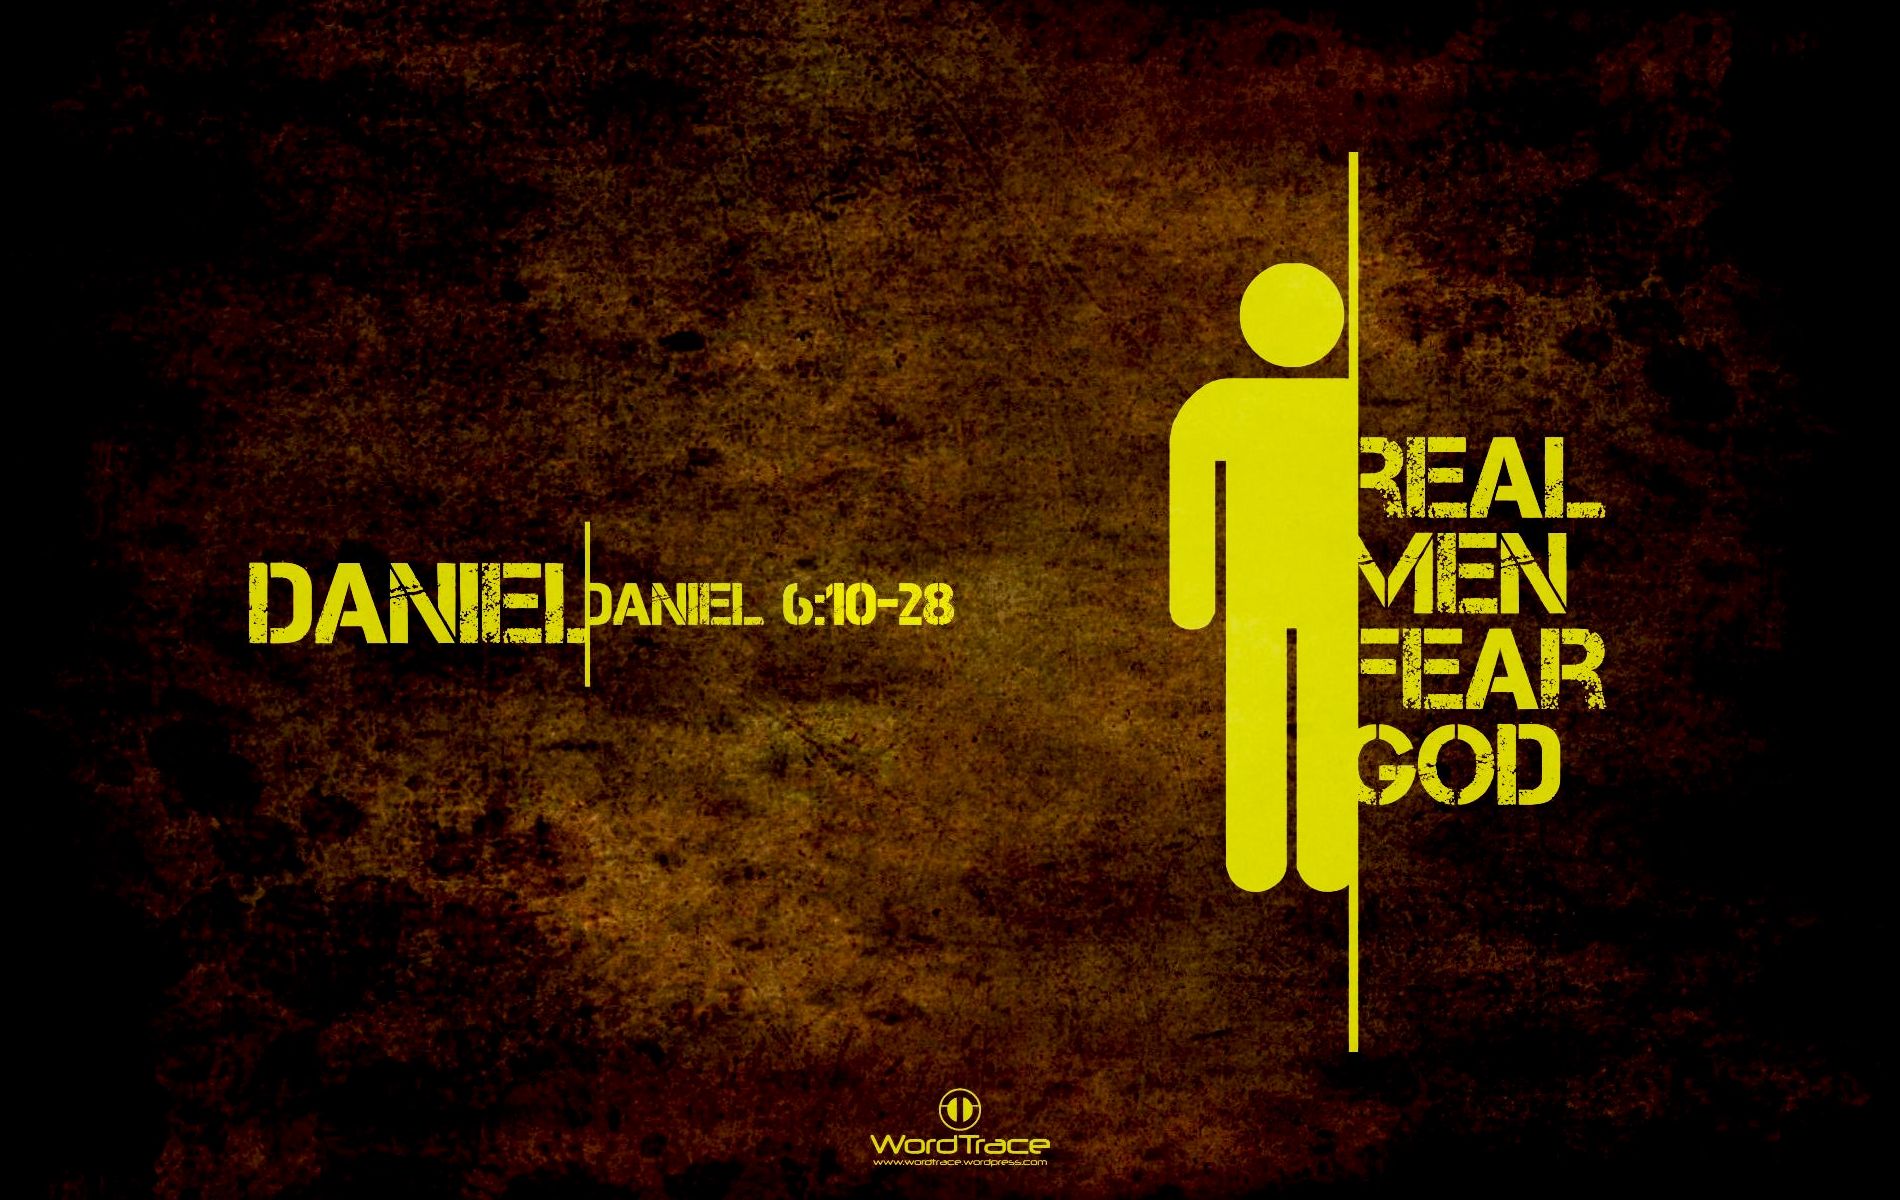  james version open bible wallpaper holy bible background holy bible